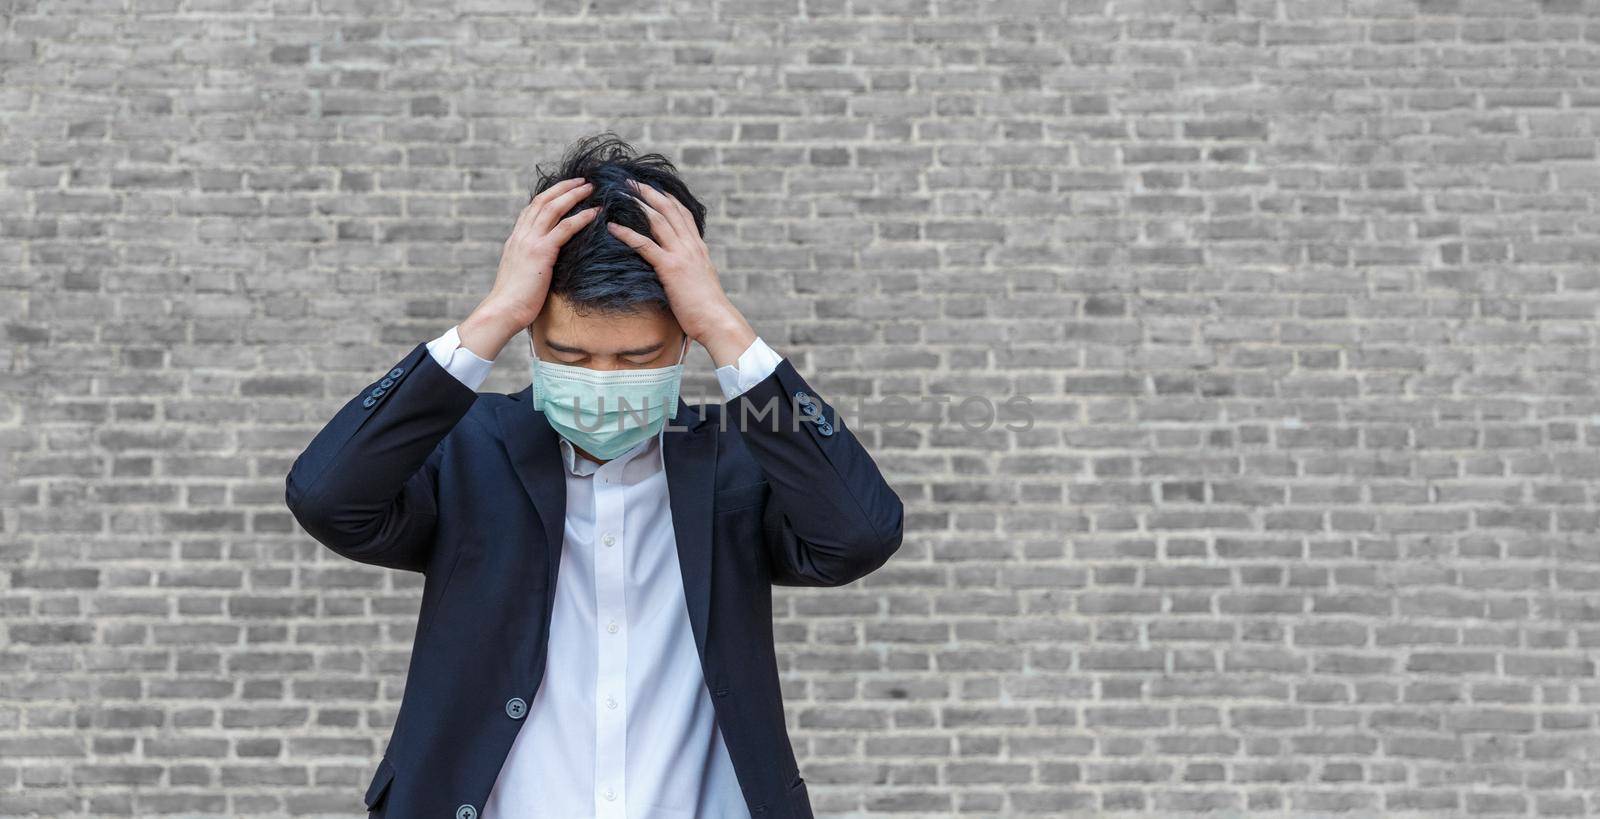 Business man in distress of job losses due to COVID-19 virus pandemic